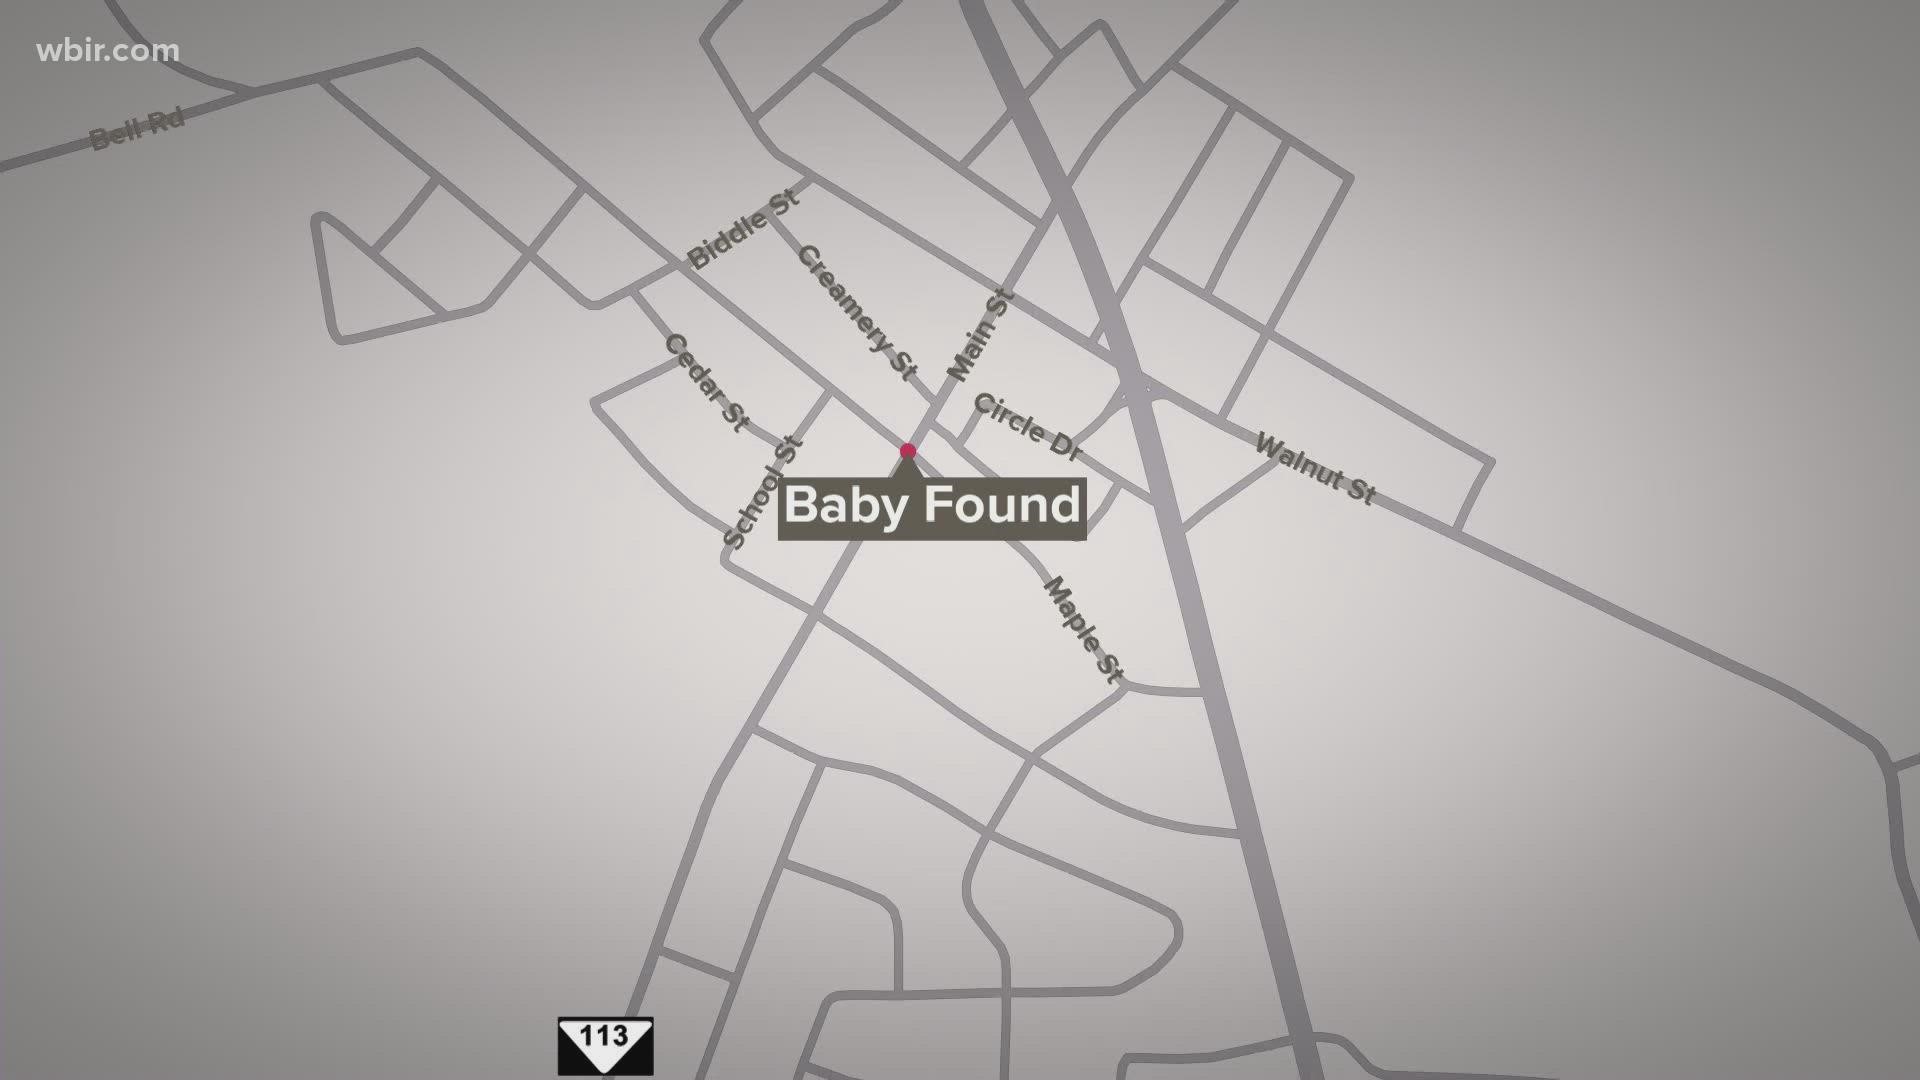 The White Pine Police Department said Juan Cervantes was running from the scene of a crash and had left his child behind face-down on the sidewalk in the cold.